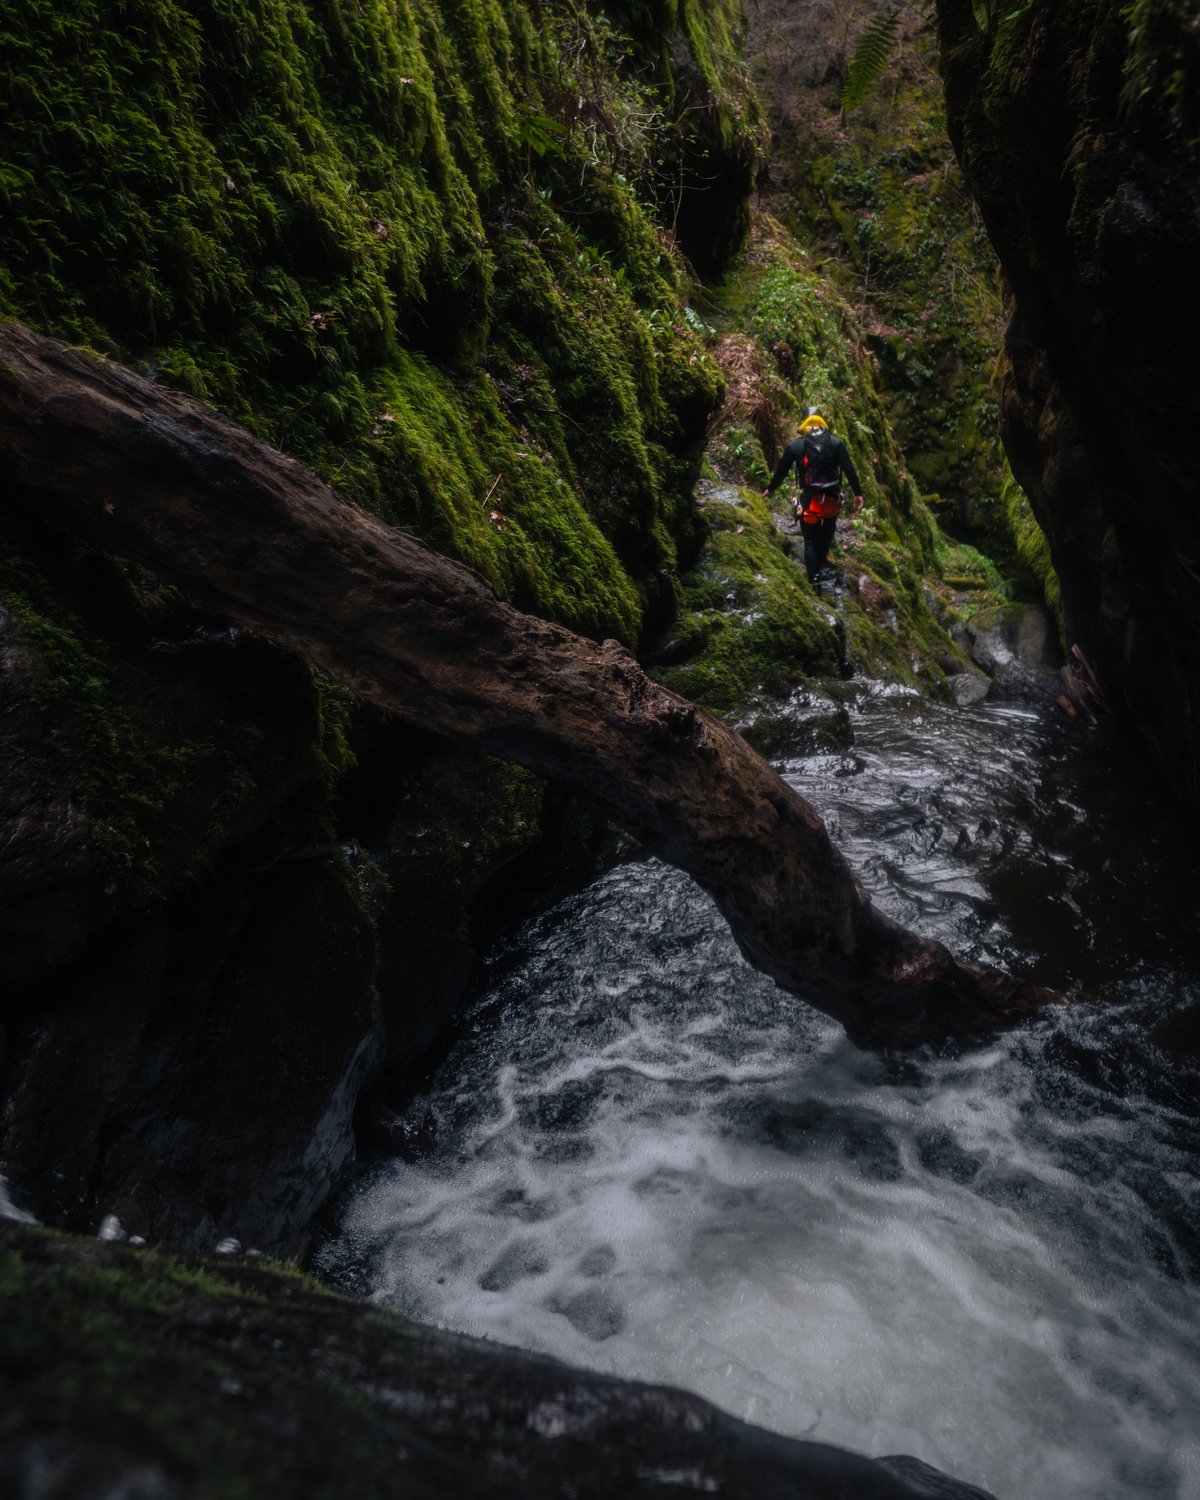 Canyoning guide sustainably explores a unique habtat for wildlife in Scotland's Canyons